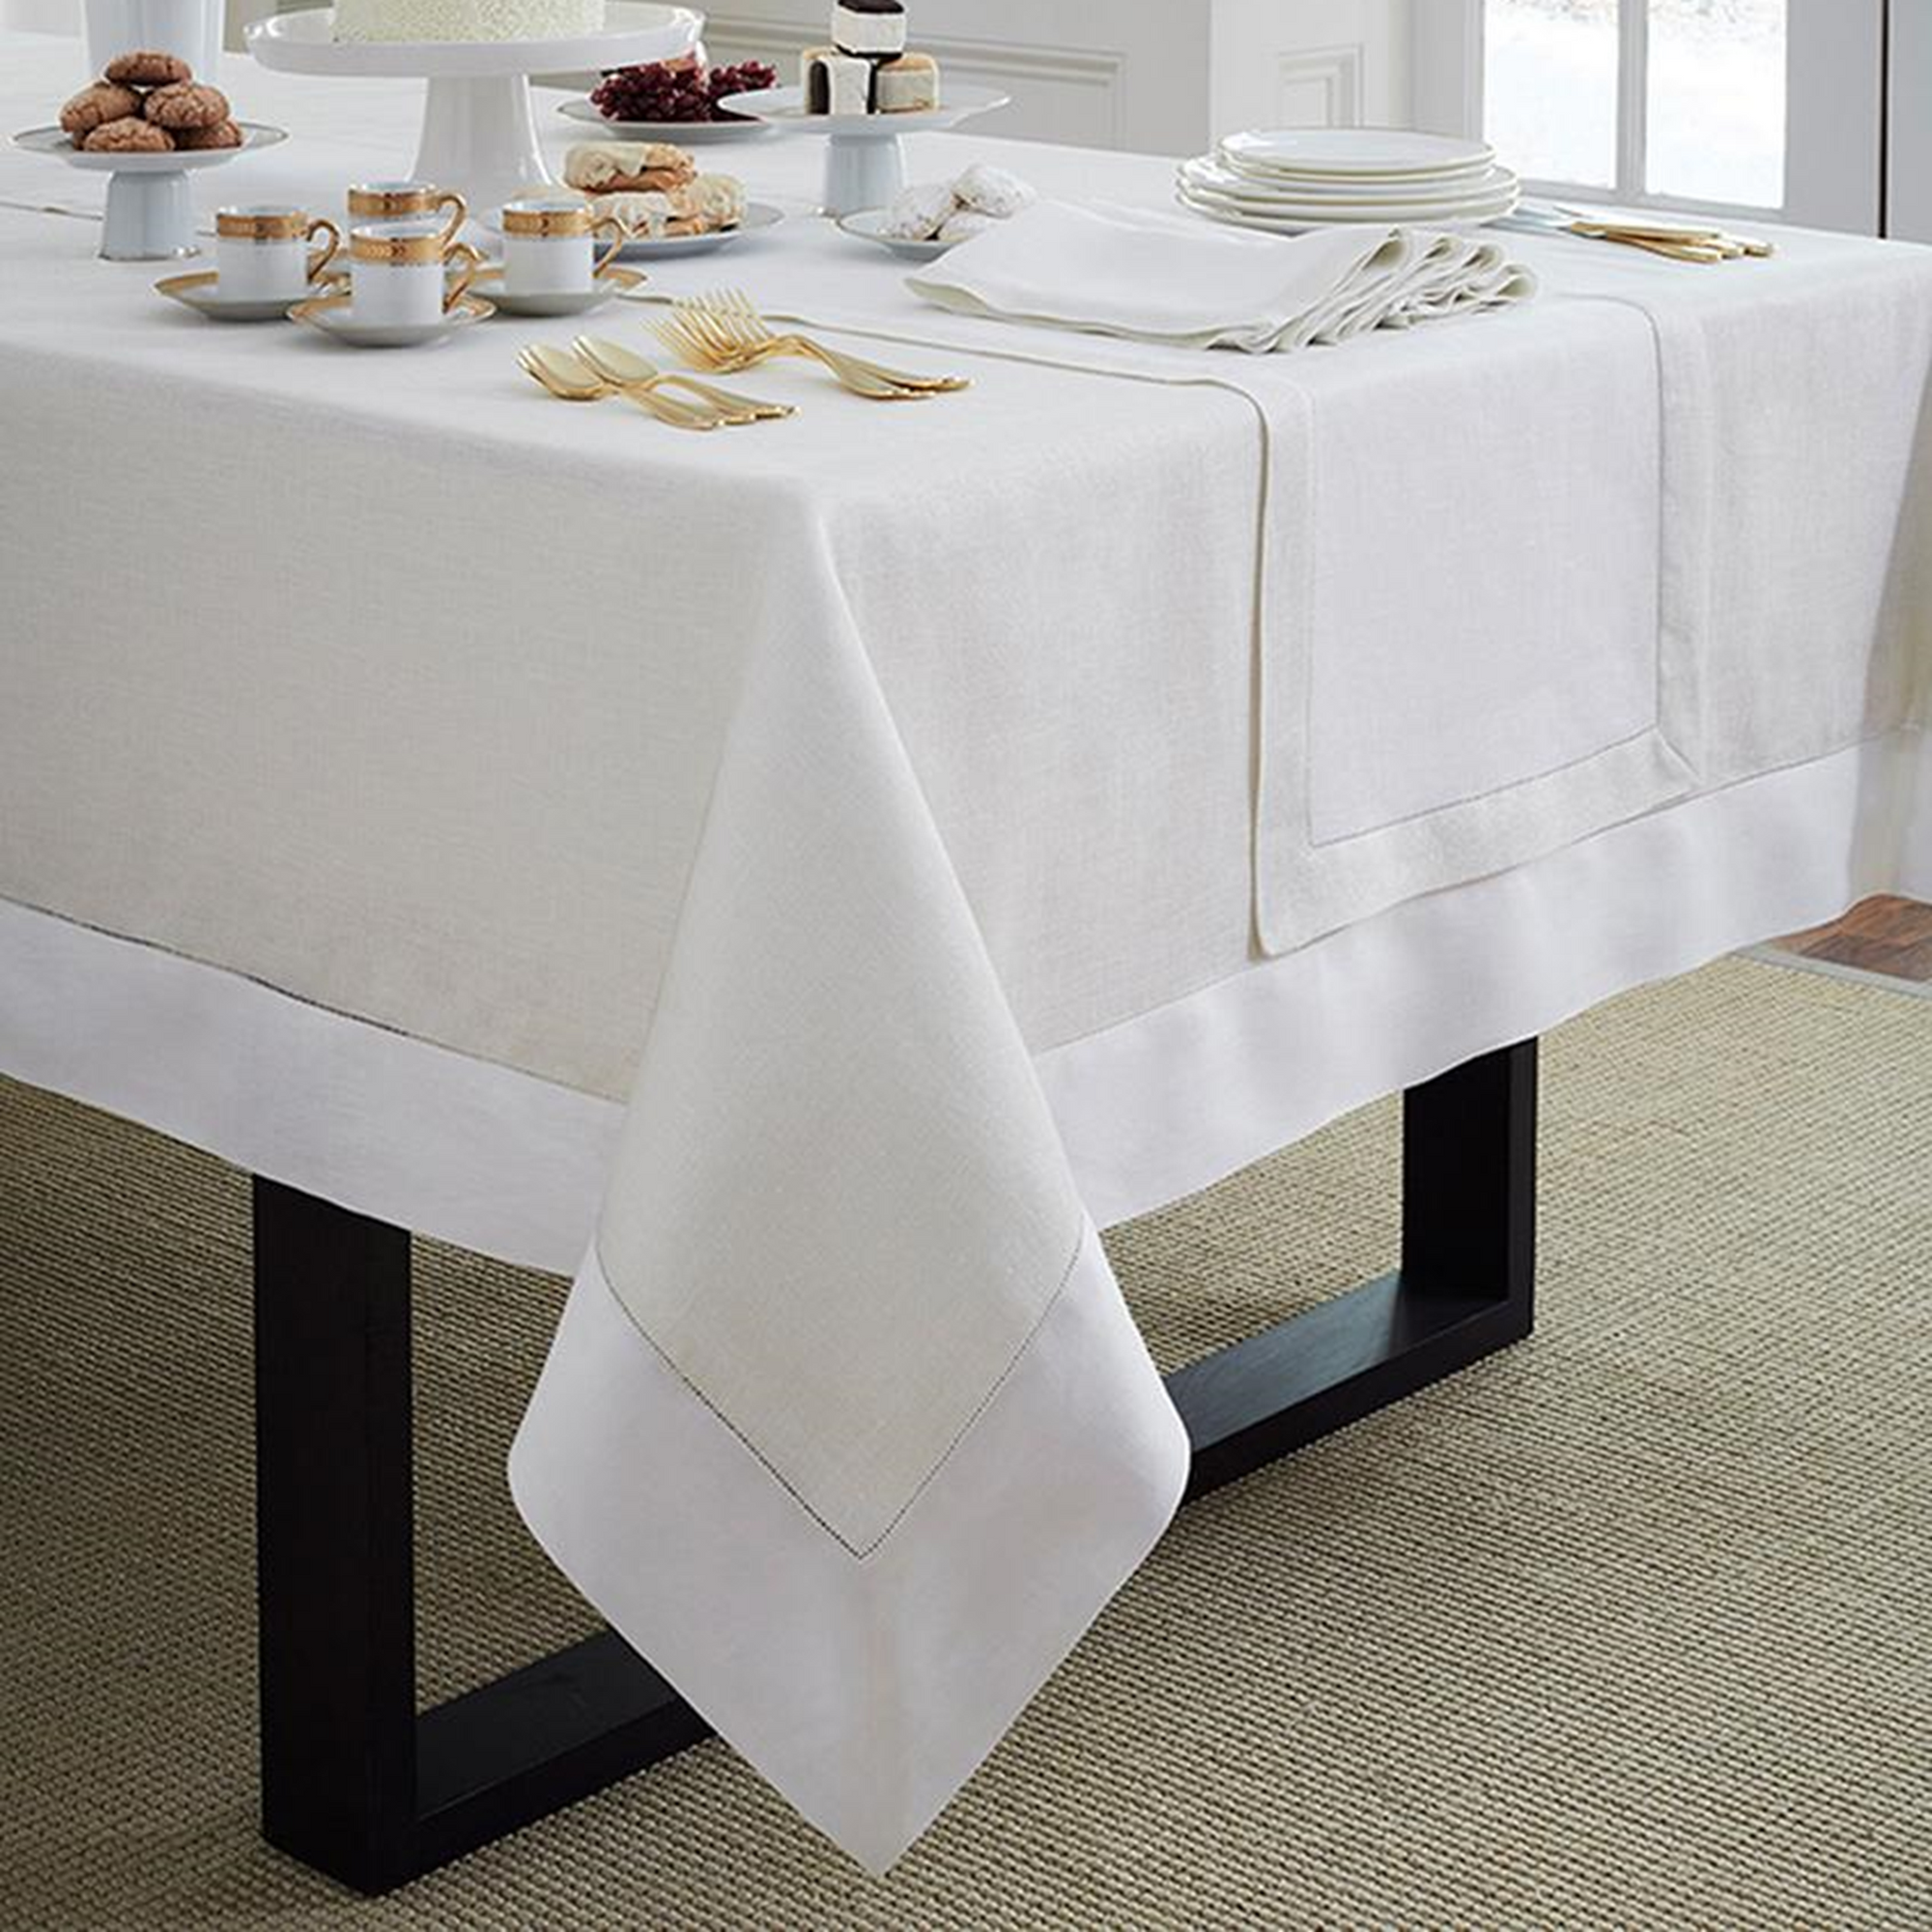 Lifestyle Image of Sferra Reece Table Linens in White/Gold Color